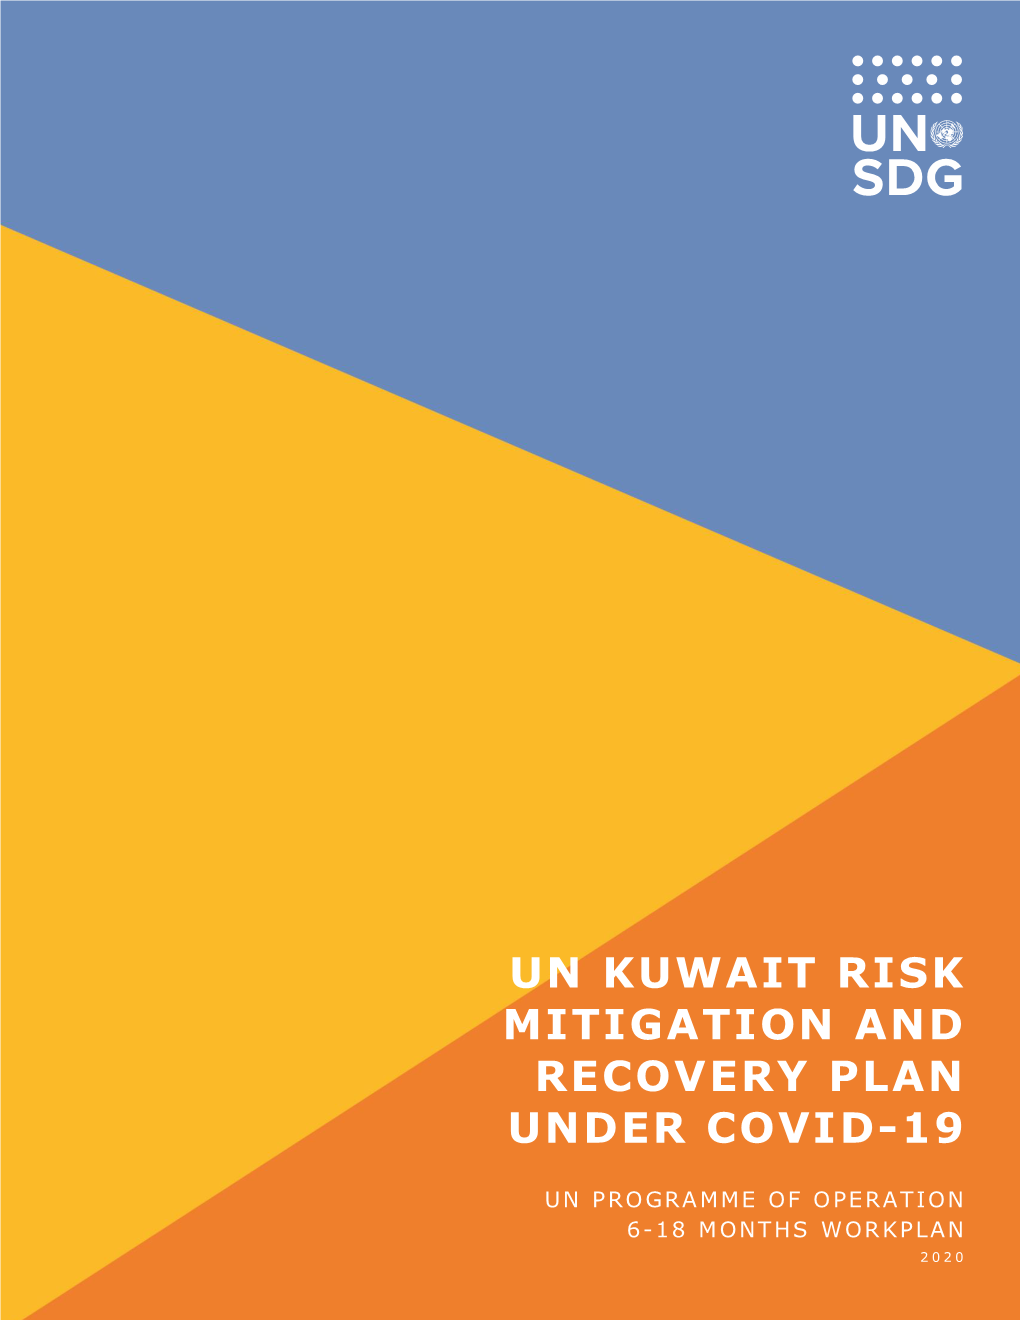 Un Kuwait Risk Mitigation and Recovery Plan Under Covid-19